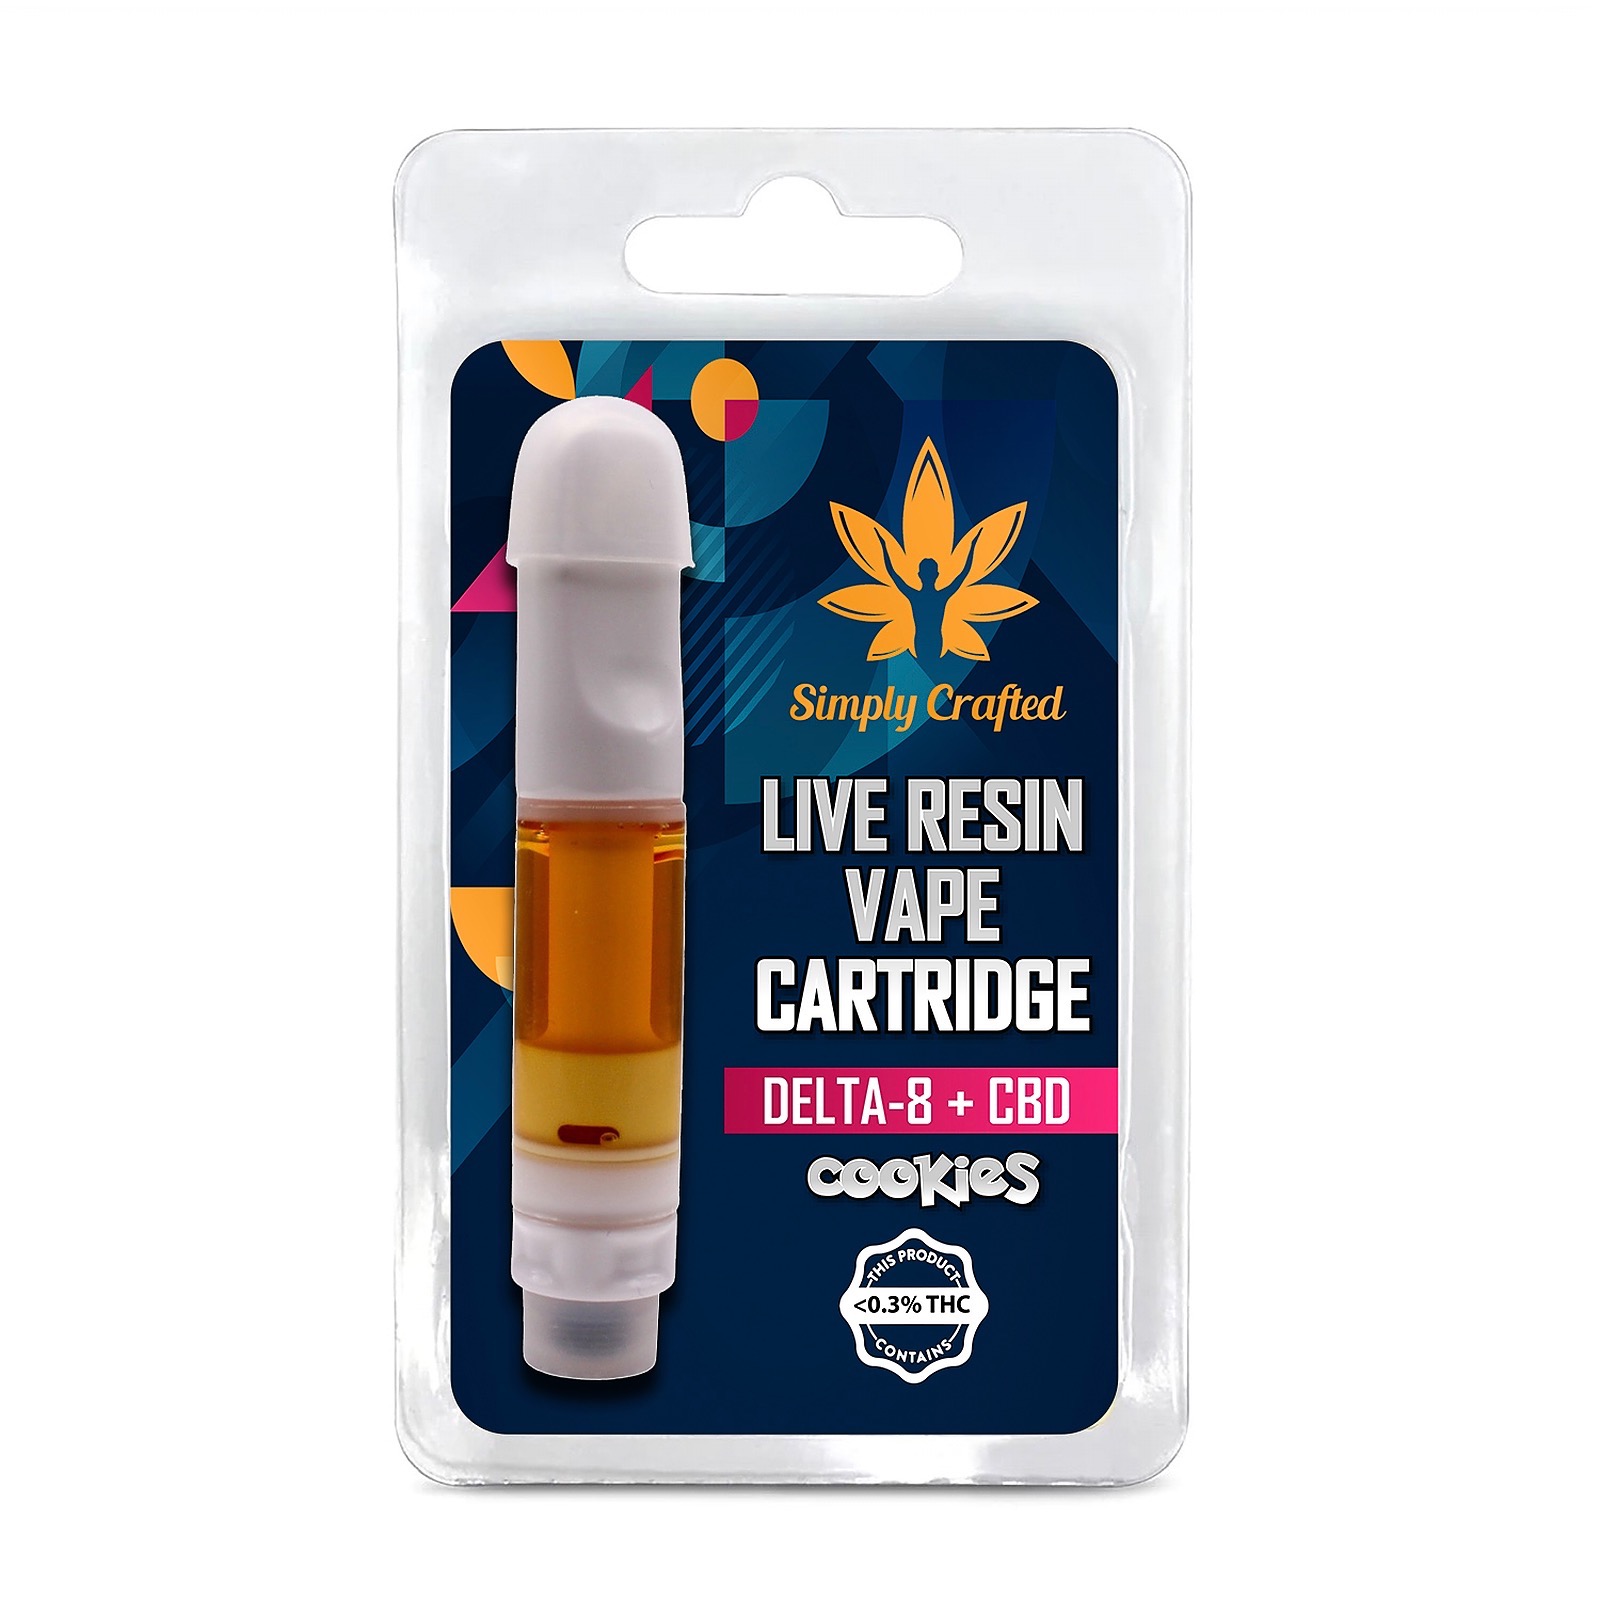 Simply Crafted Free Shipping Save 25 With Code Leafly Cbd Delta 8 Live Resin Vape Cart 4574